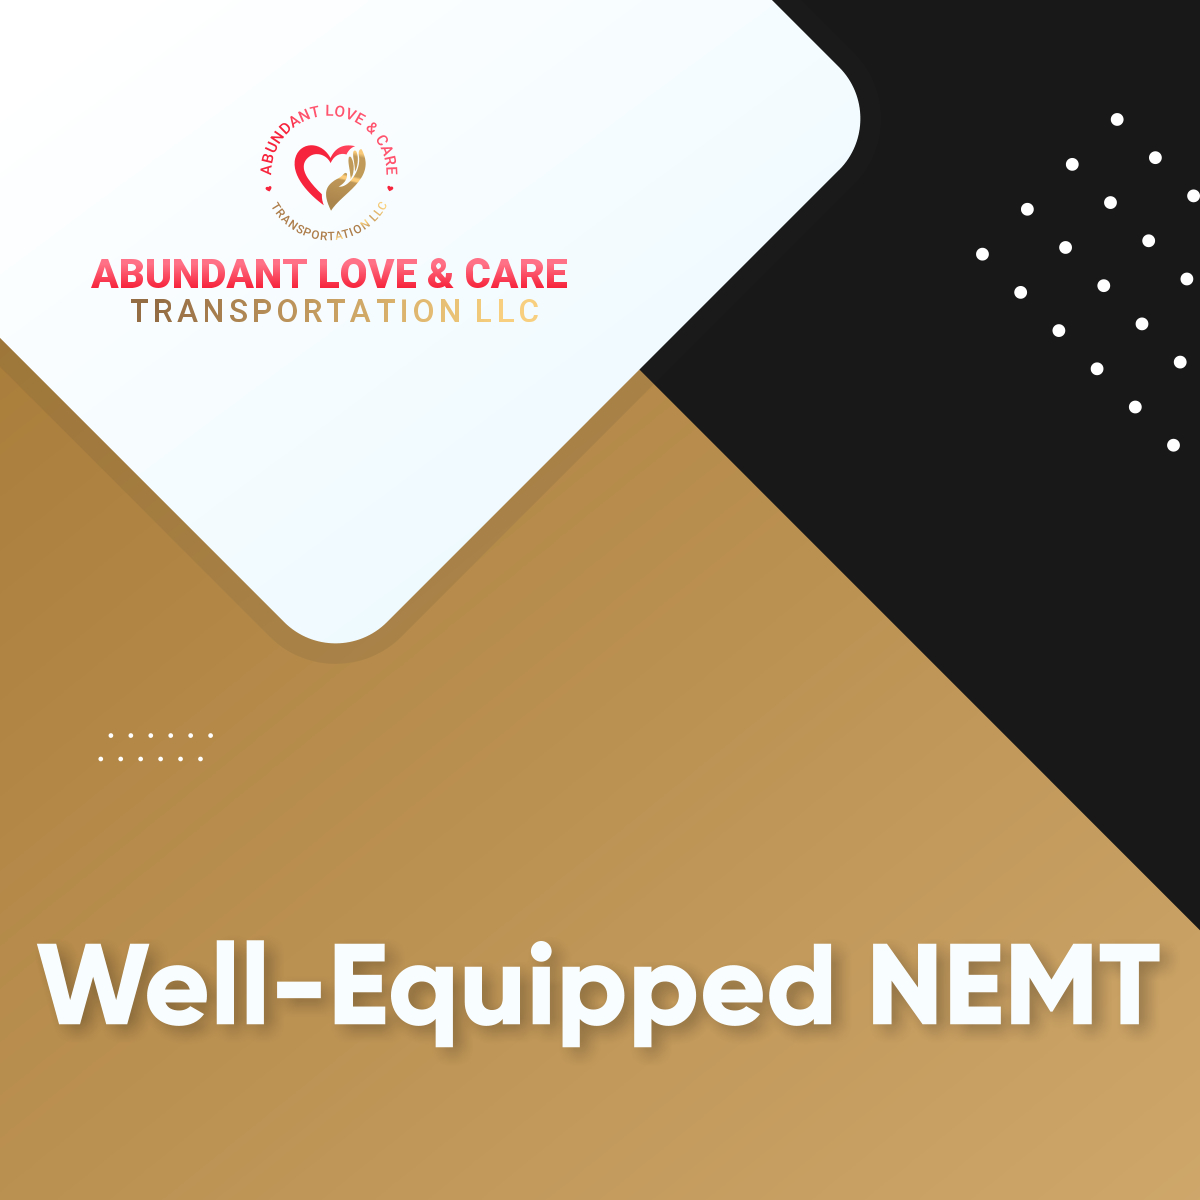 Our NEMT service prioritizes the comfort and well-being of our passengers. To ensure a secure journey, our vehicles are furnished with comfortable seating and medical equipment.

#NEMT #WinterHavenFL #WellEquipped